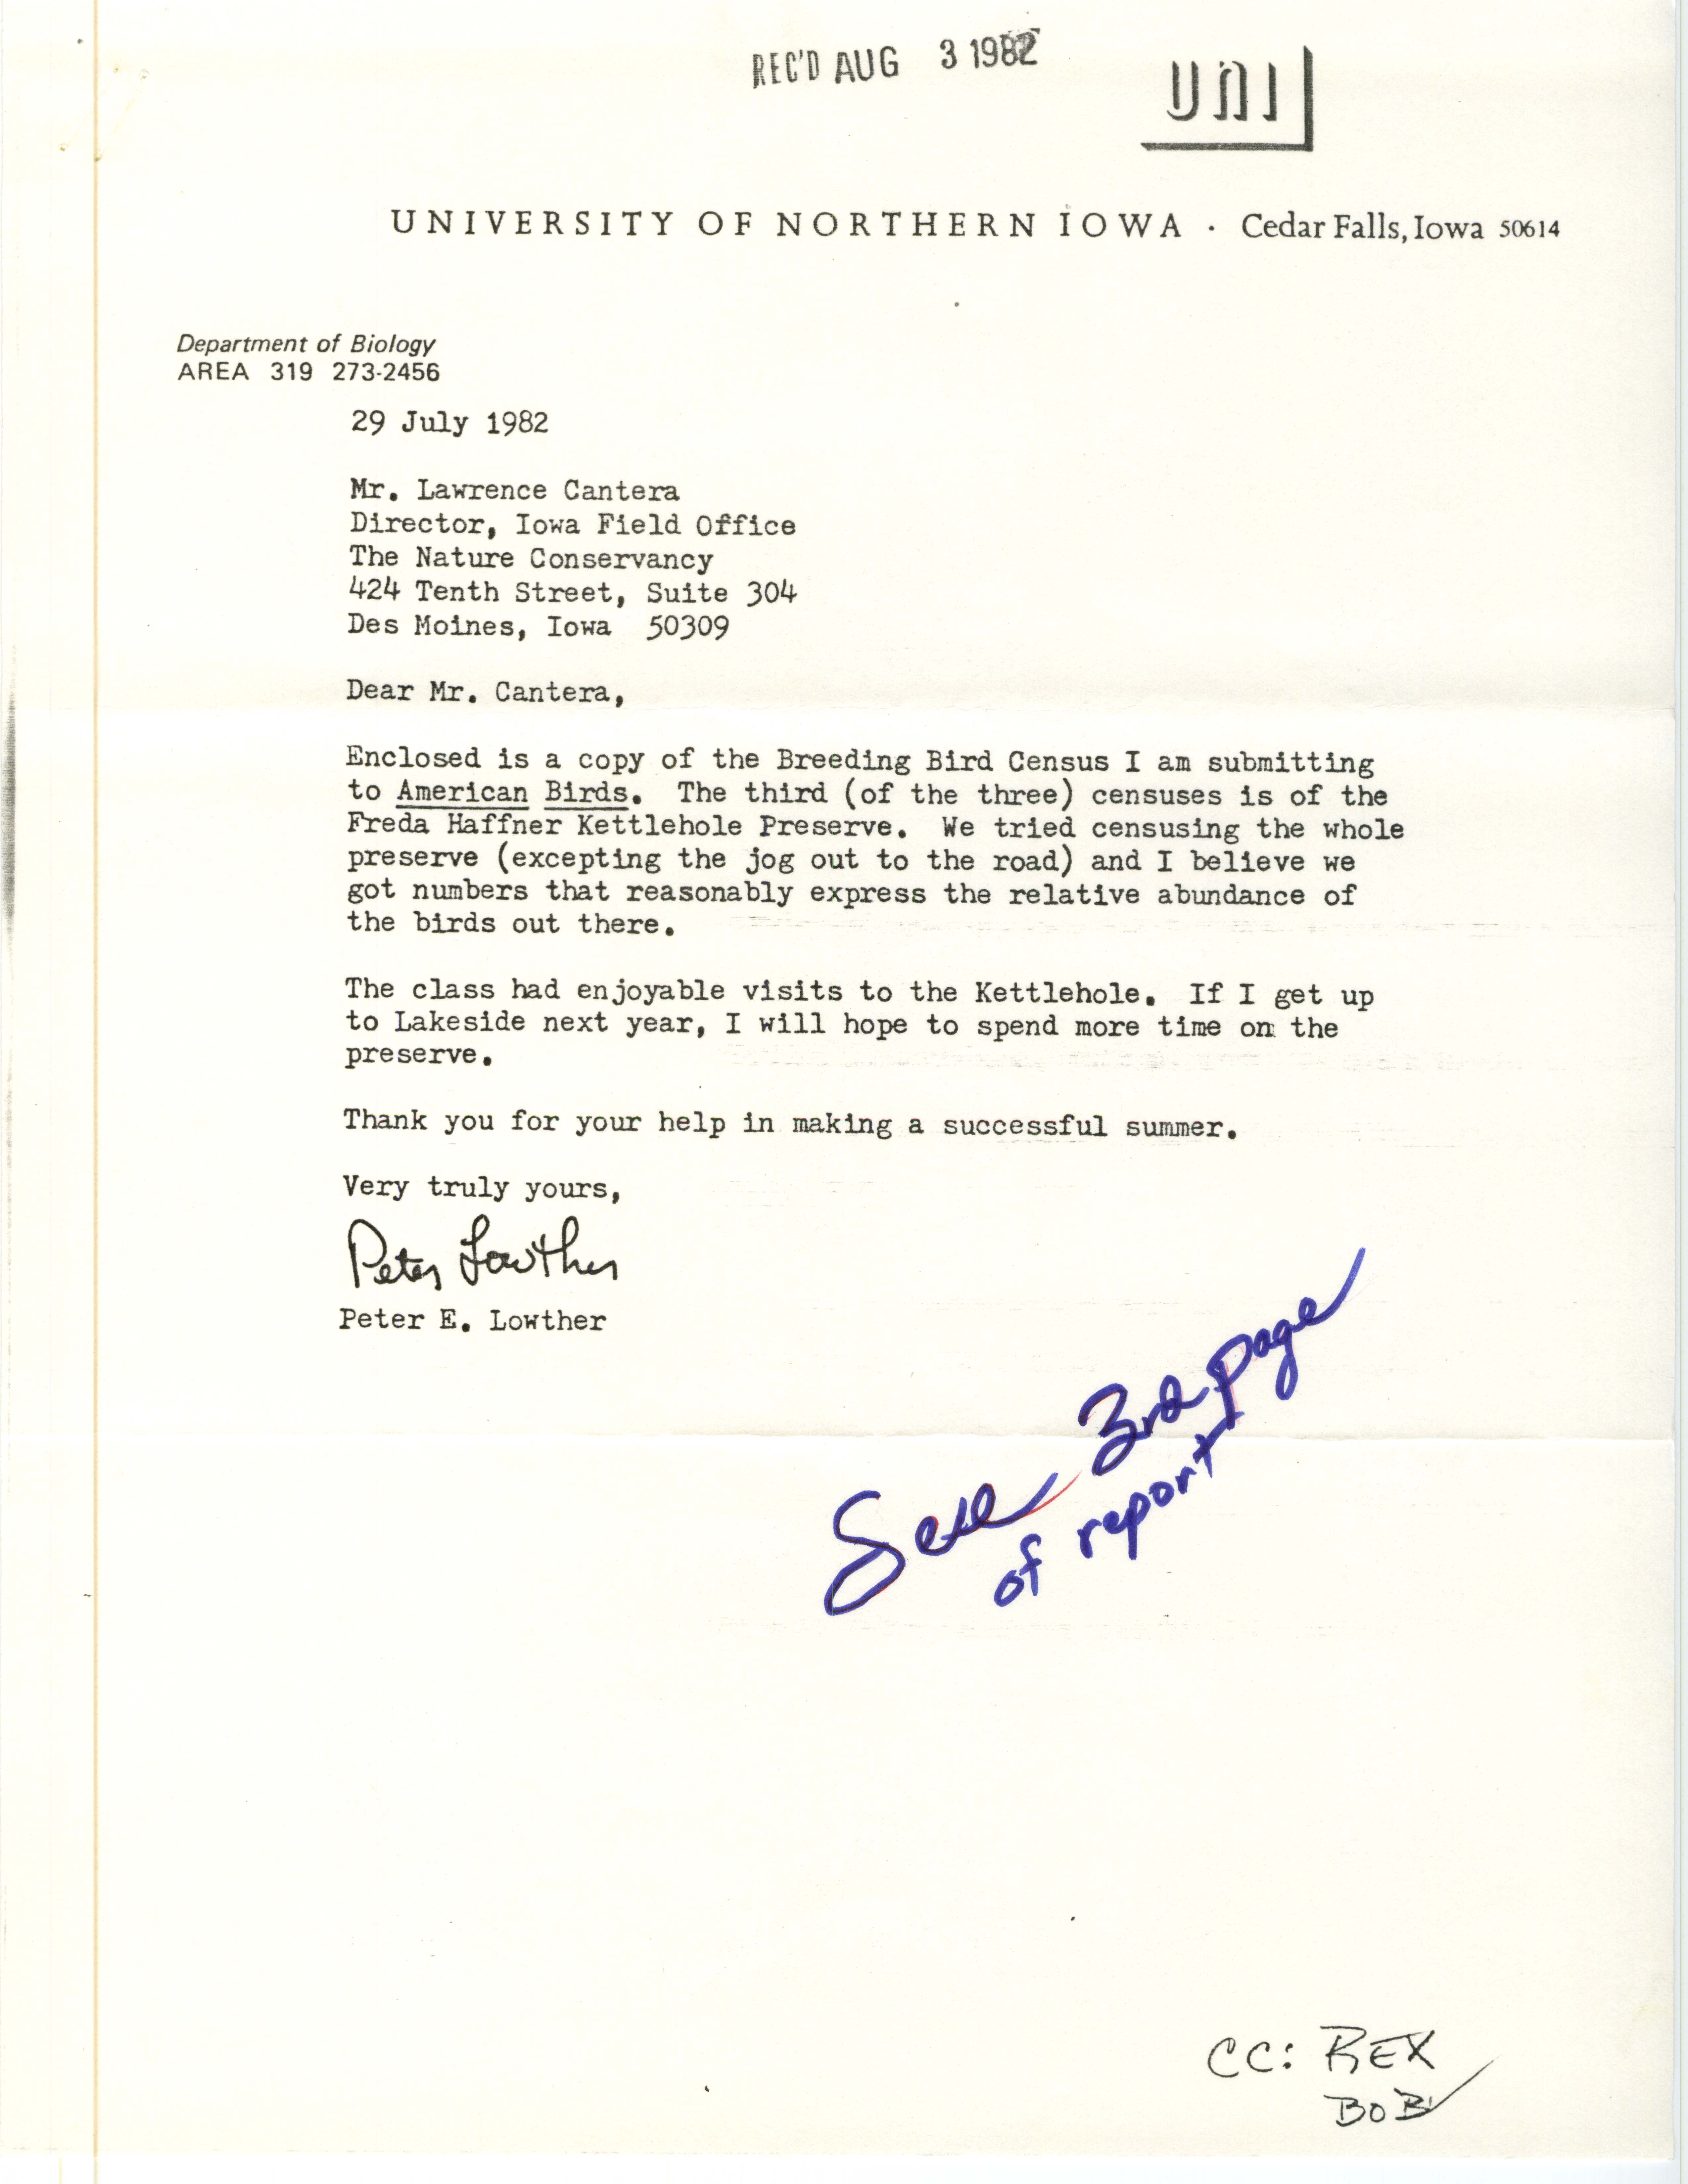 Peter E. Lowther letter to Lawrence Cantera regarding a report of three breeding bird censuses, July 29, 1982